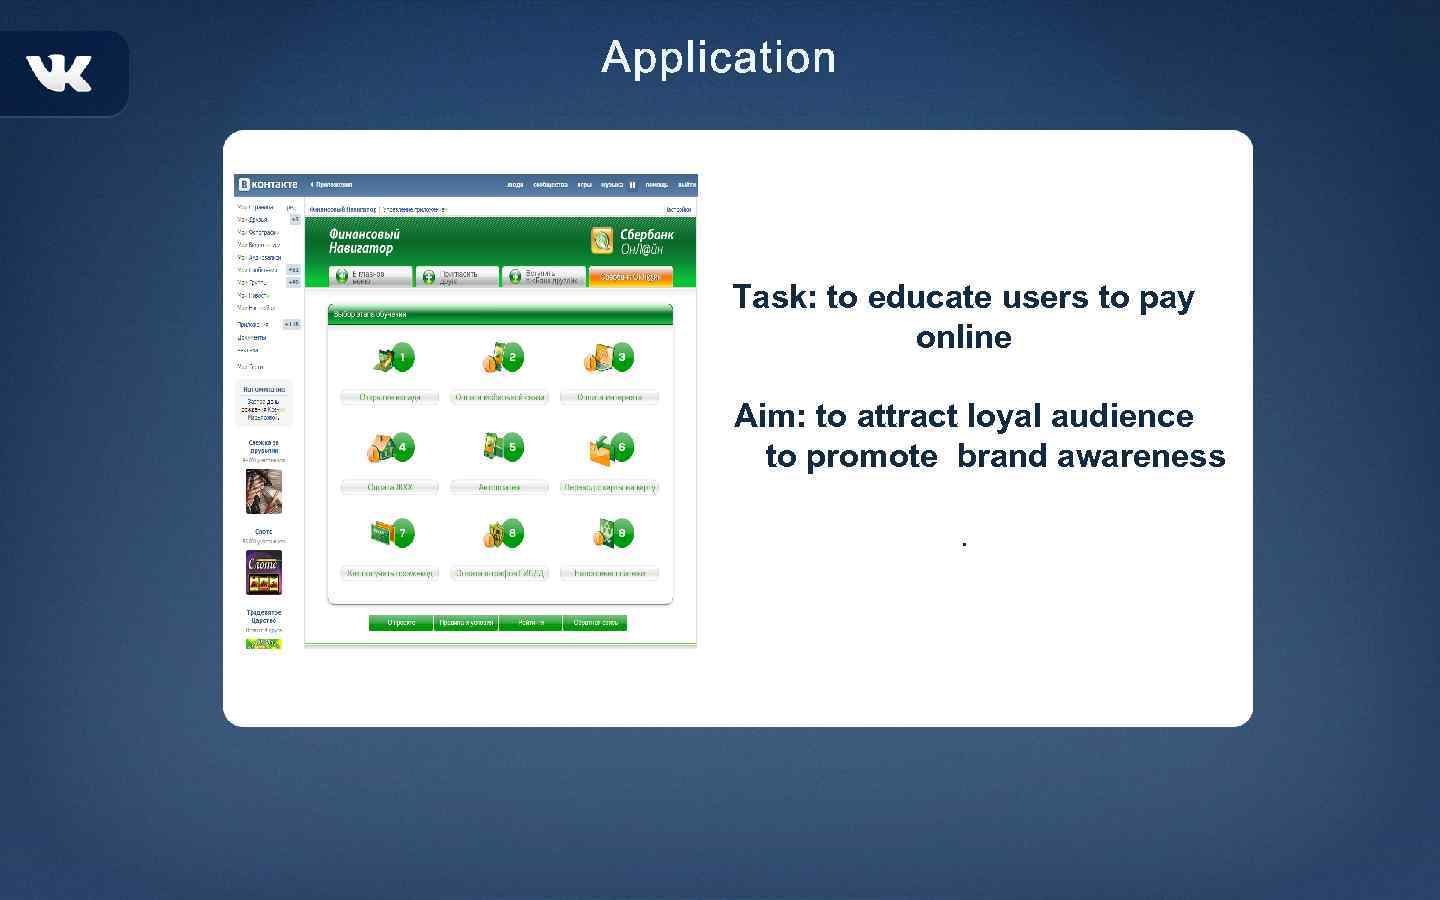 Task: to educate users to pay online 4 brands Aim: to attract loyal audience